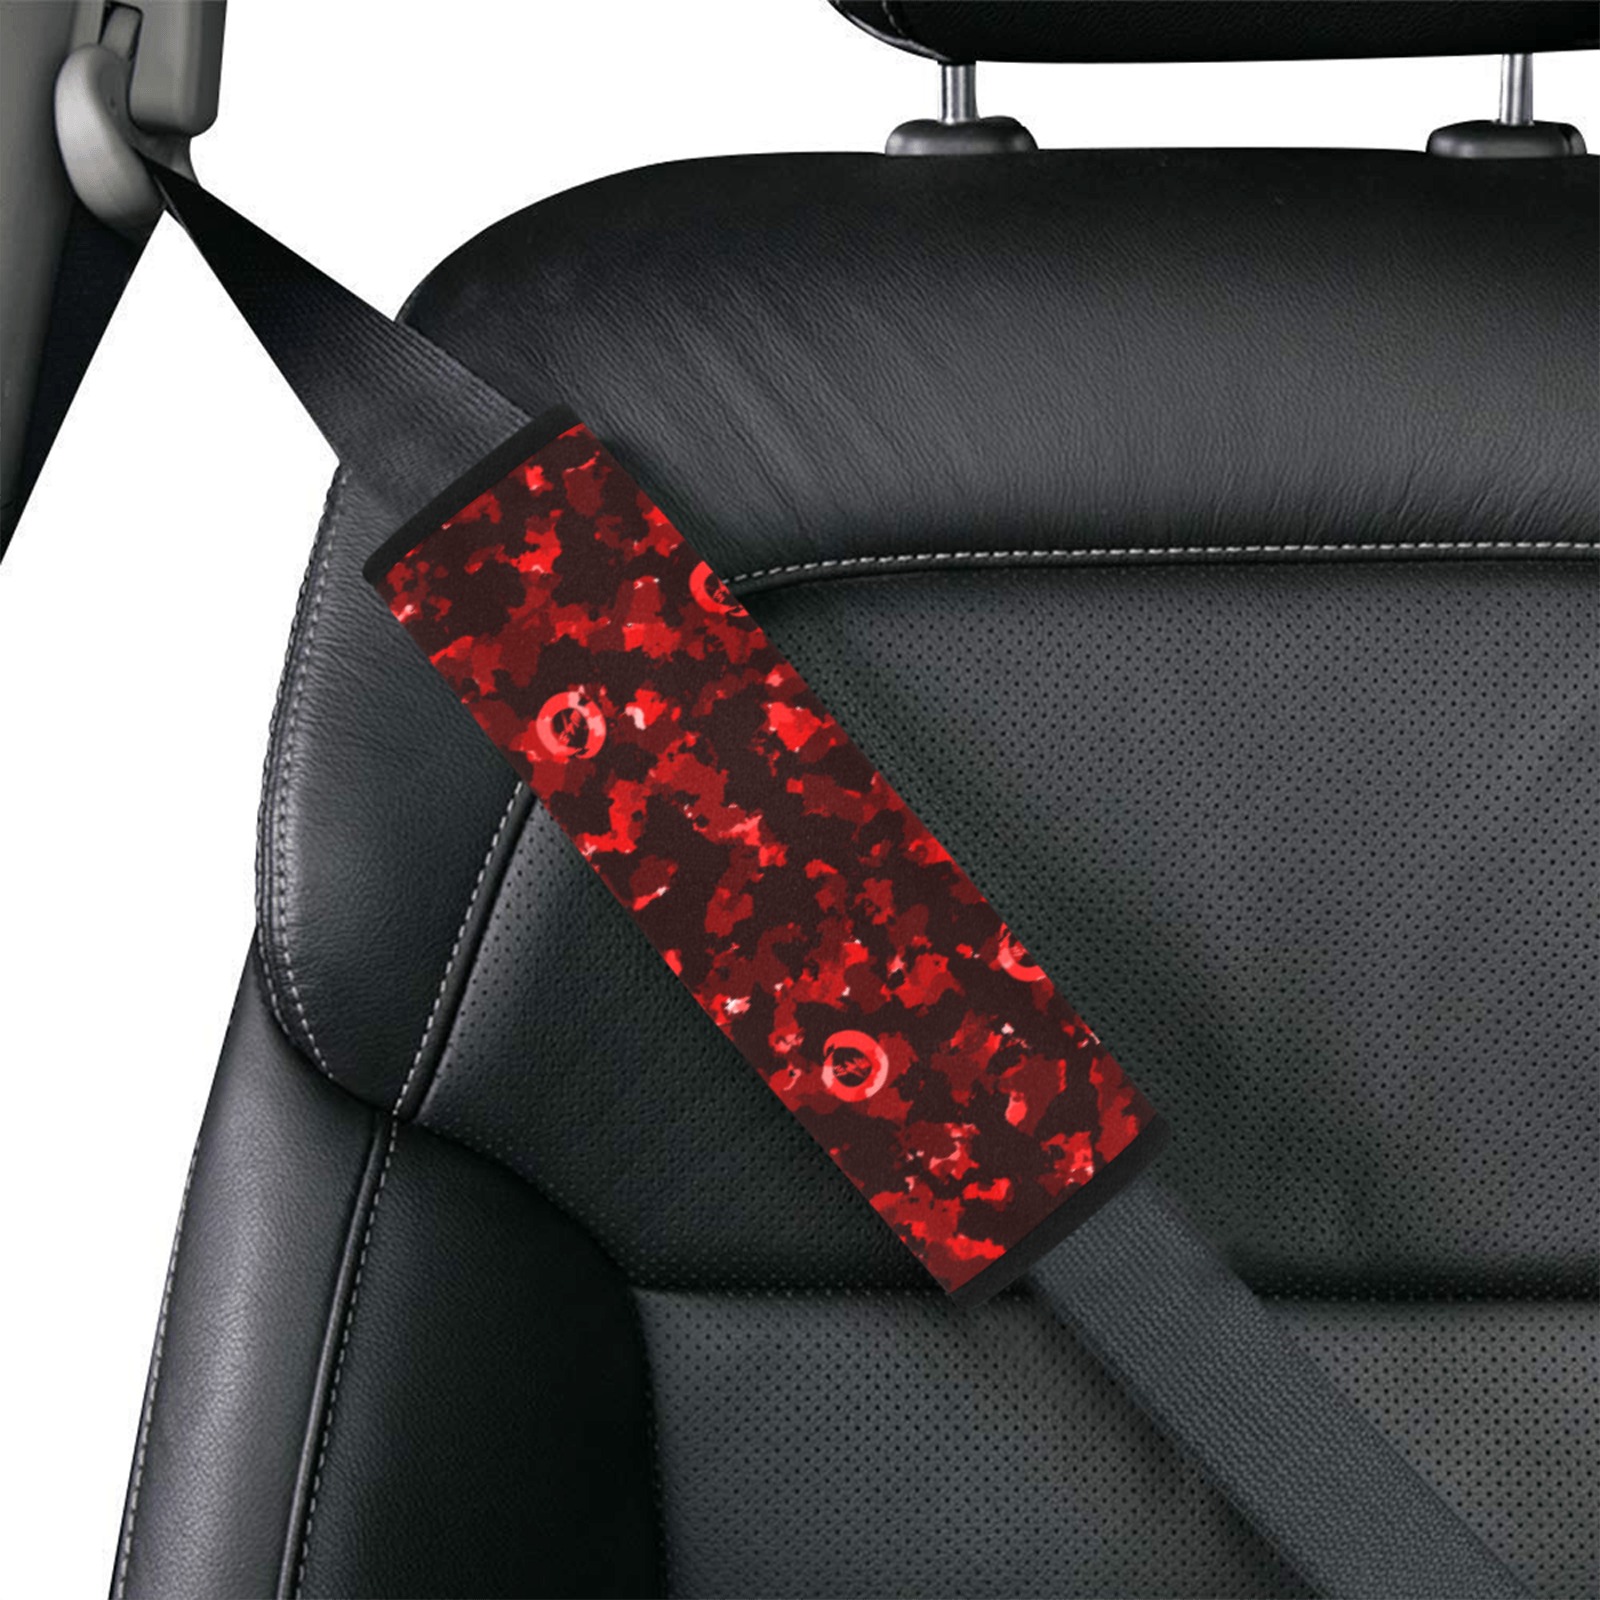 New Project (2) (2) Car Seat Belt Cover 7''x8.5'' (Pack of 2)